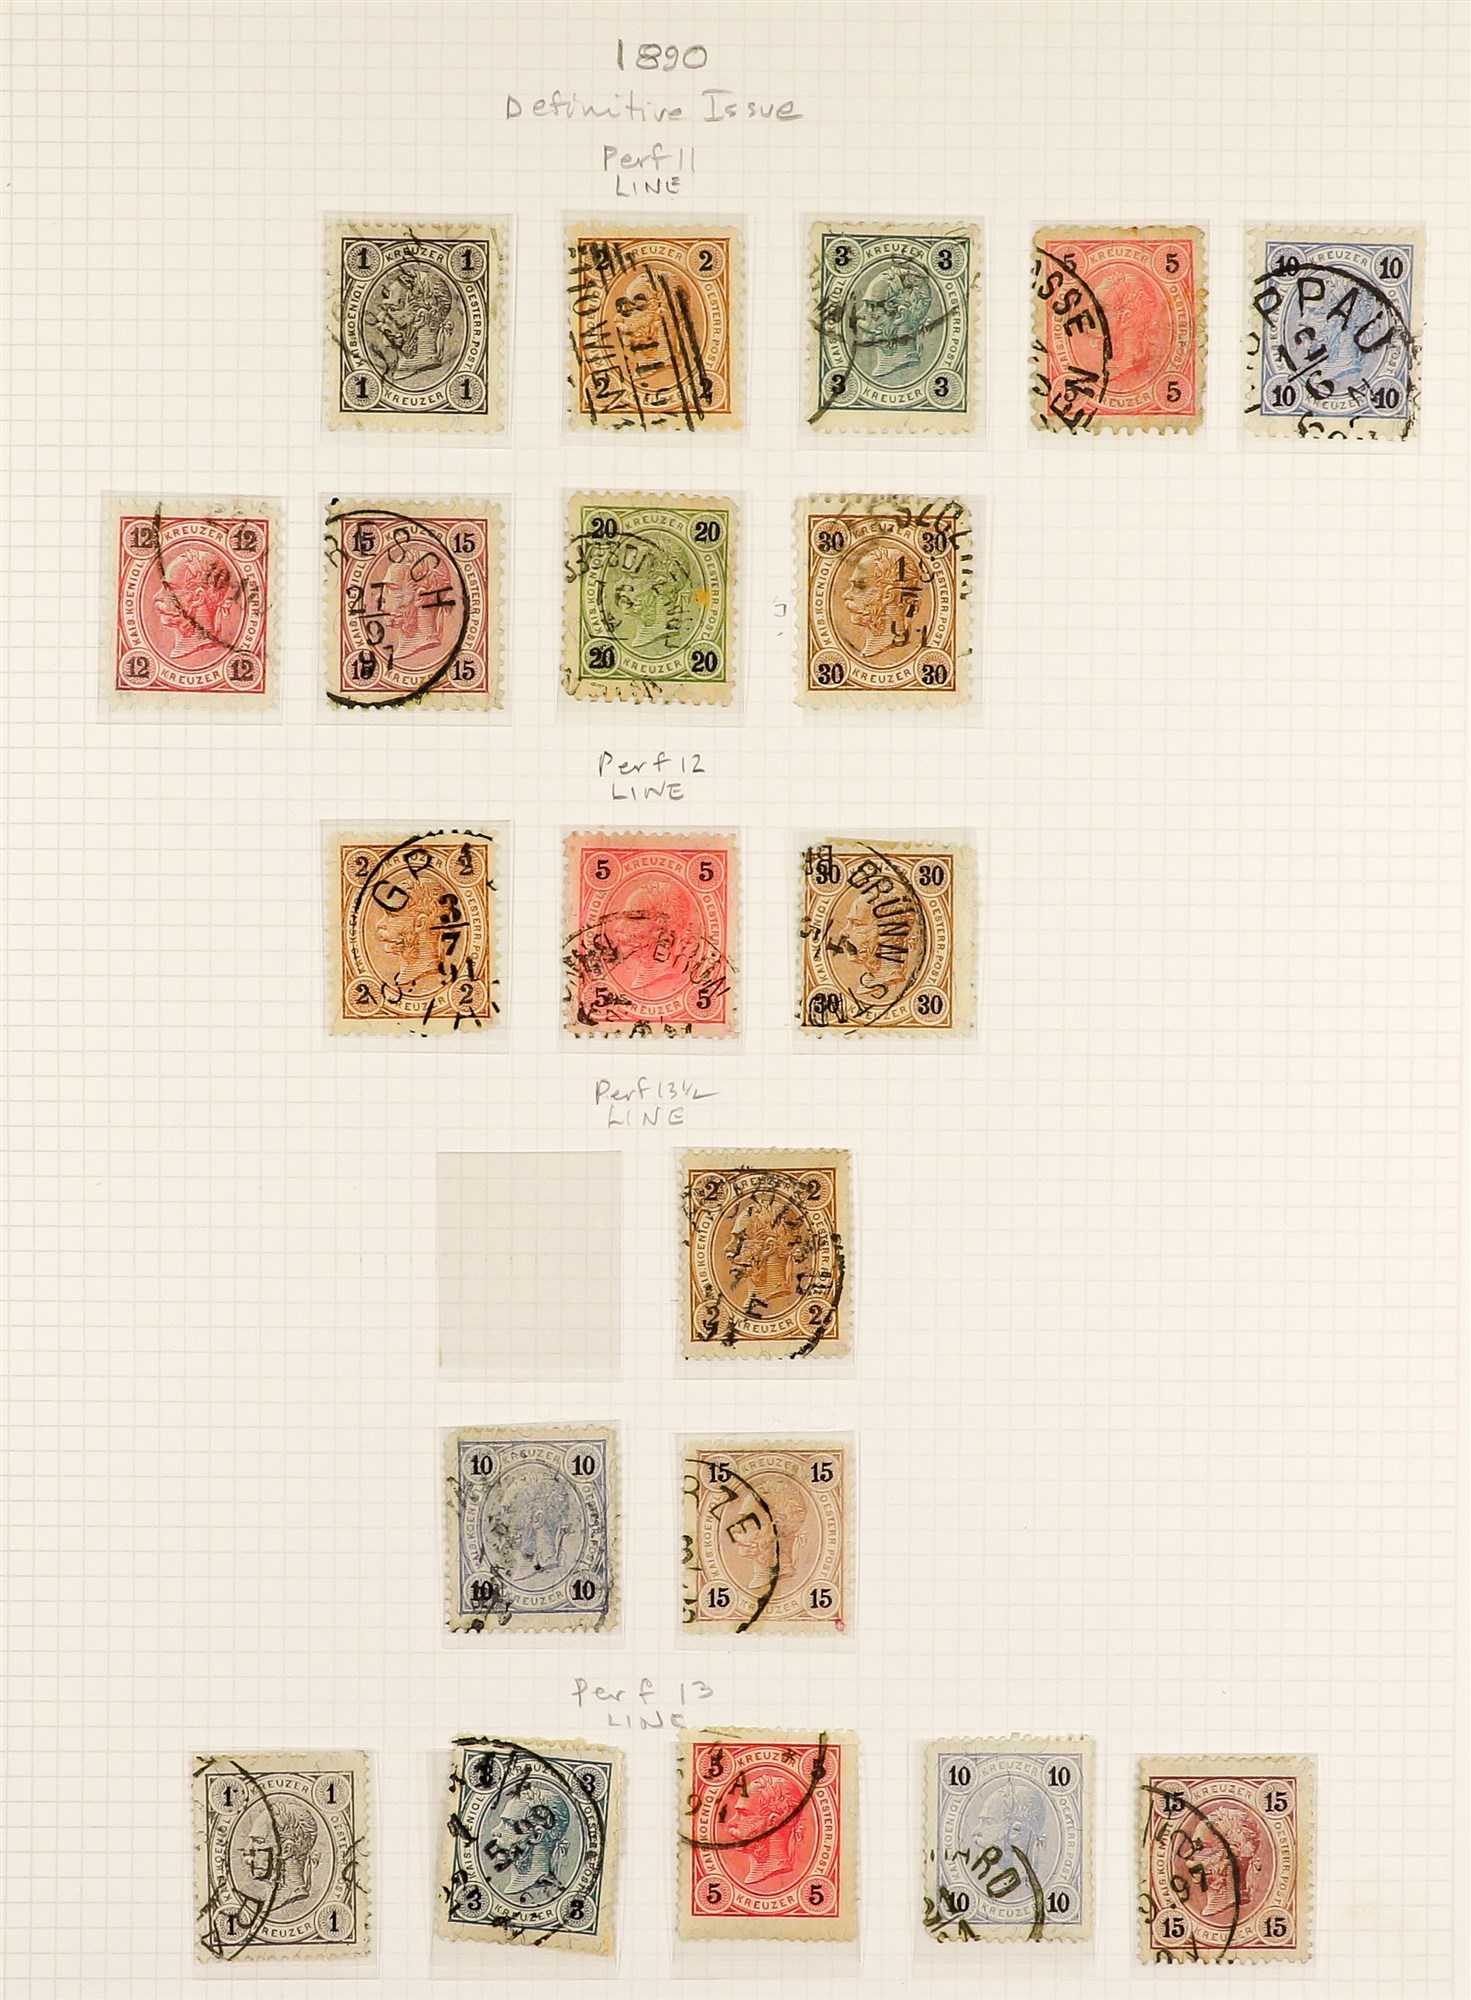 AUSTRIA 1890 - 1907 FRANZ JOSEF DEFINITIVES collection of over 300 stamps on album pages, semi- - Image 4 of 13